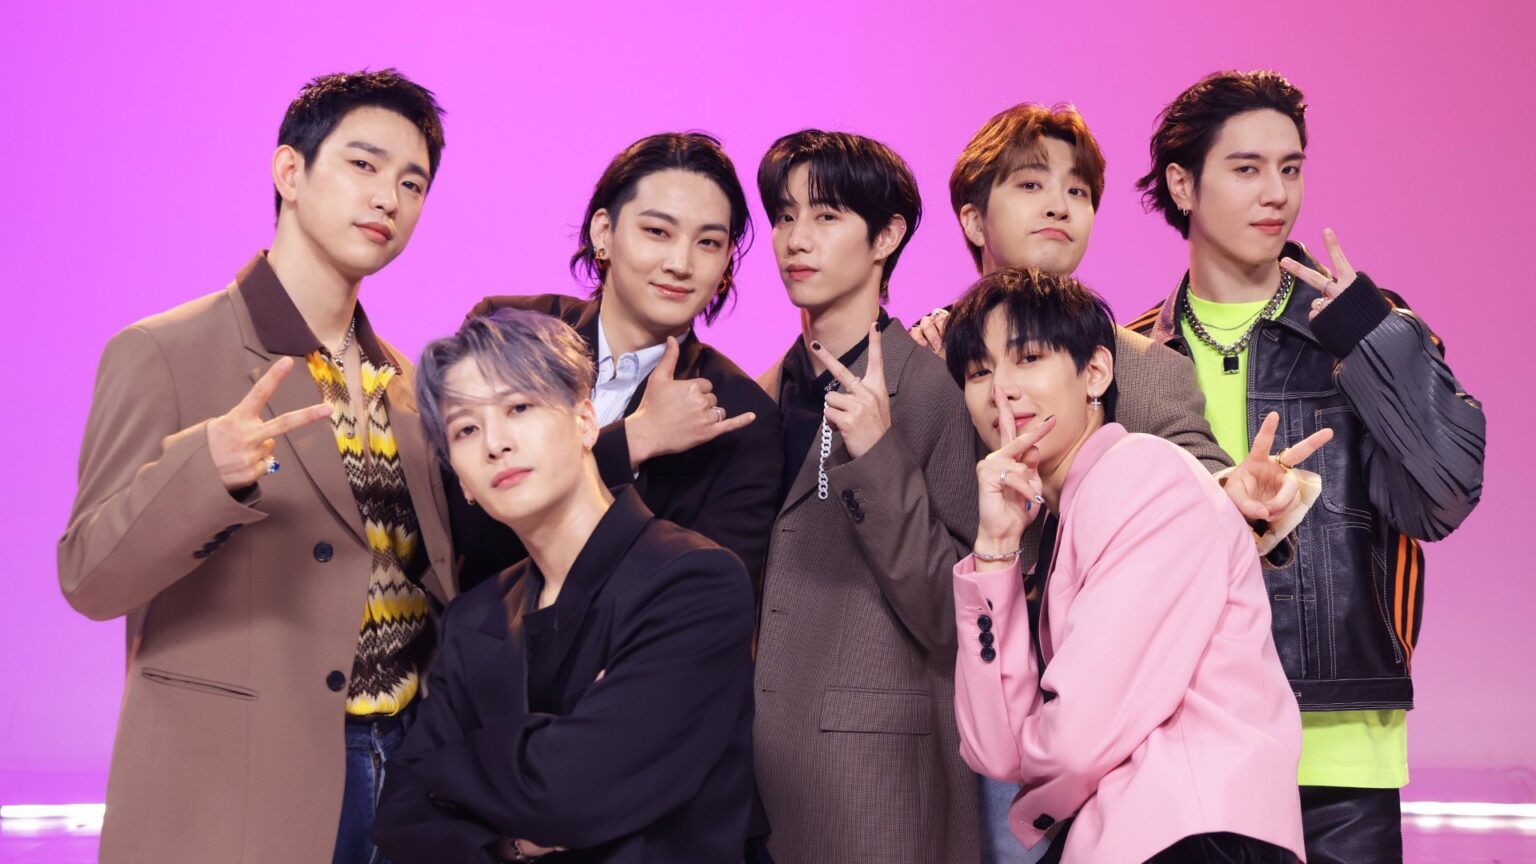 No matter how old you are, there’s always something you can enjoy from a boyband. Here are the Got7 members you need to know about.